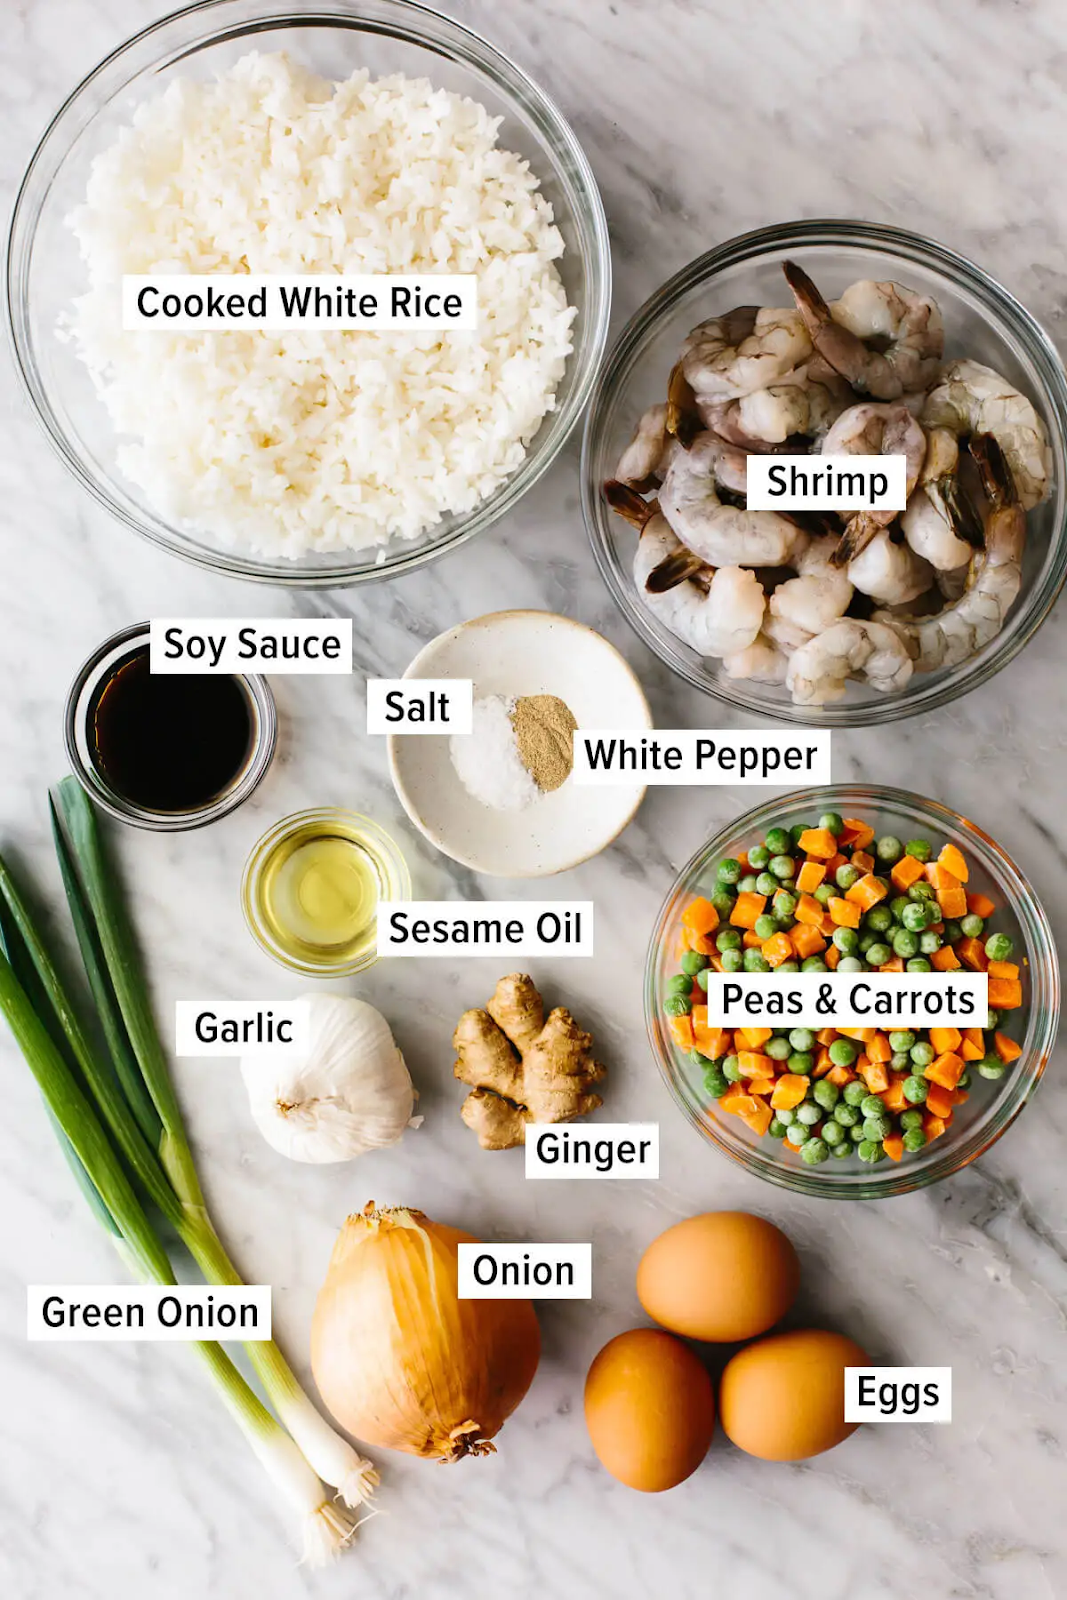 Classic Ingredients for Fried Rice Recipe